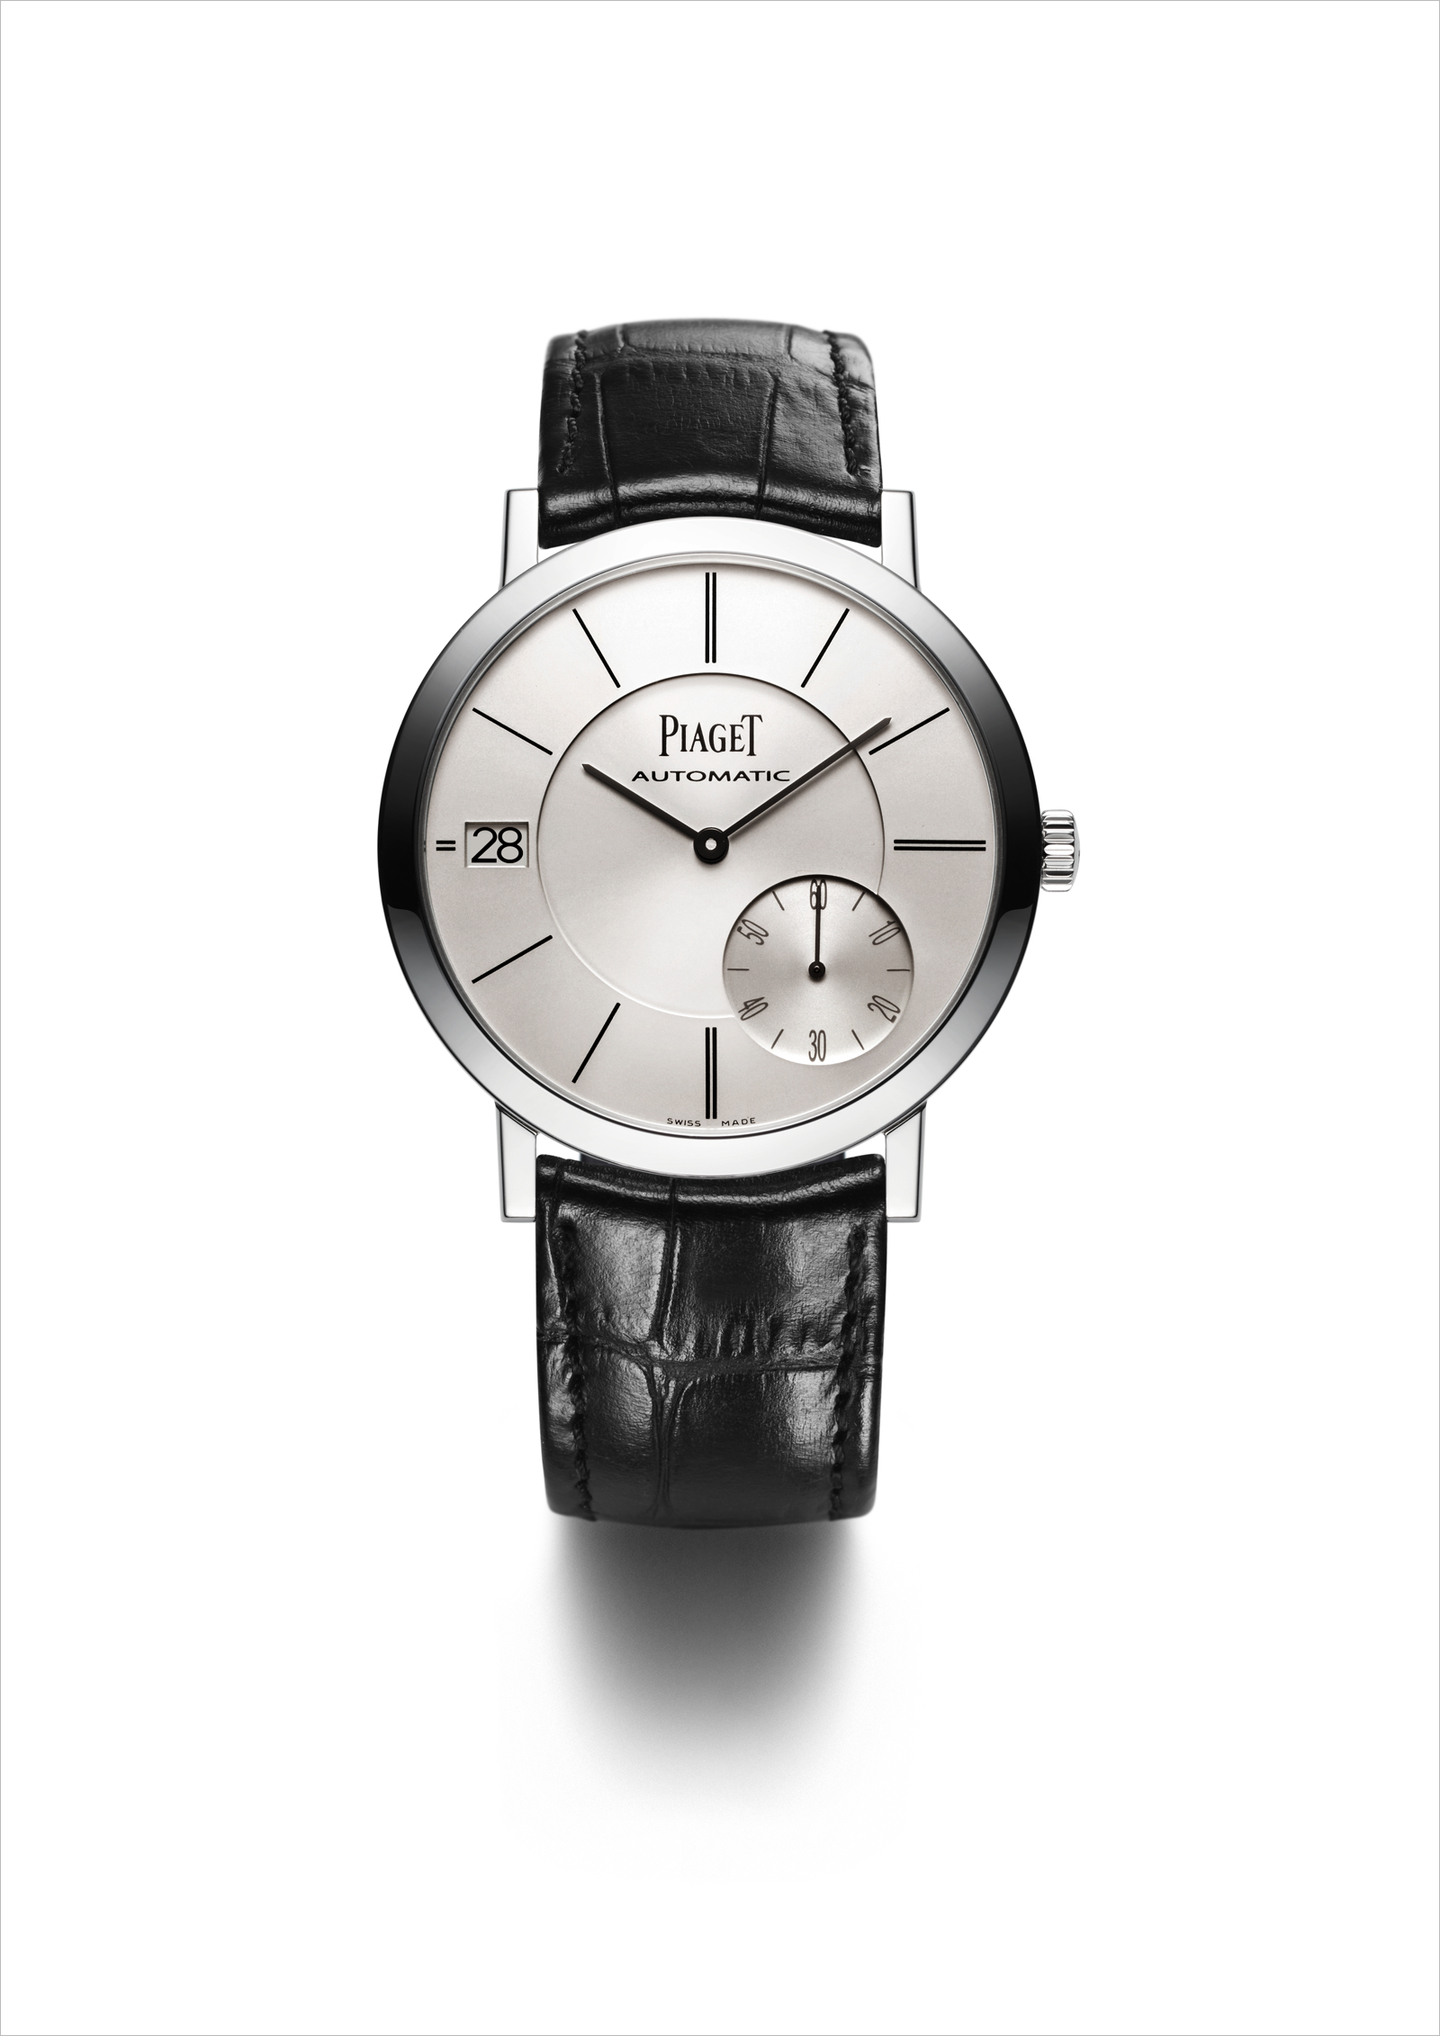 New 40mm Piaget Altiplano Date Introduced At SIHH